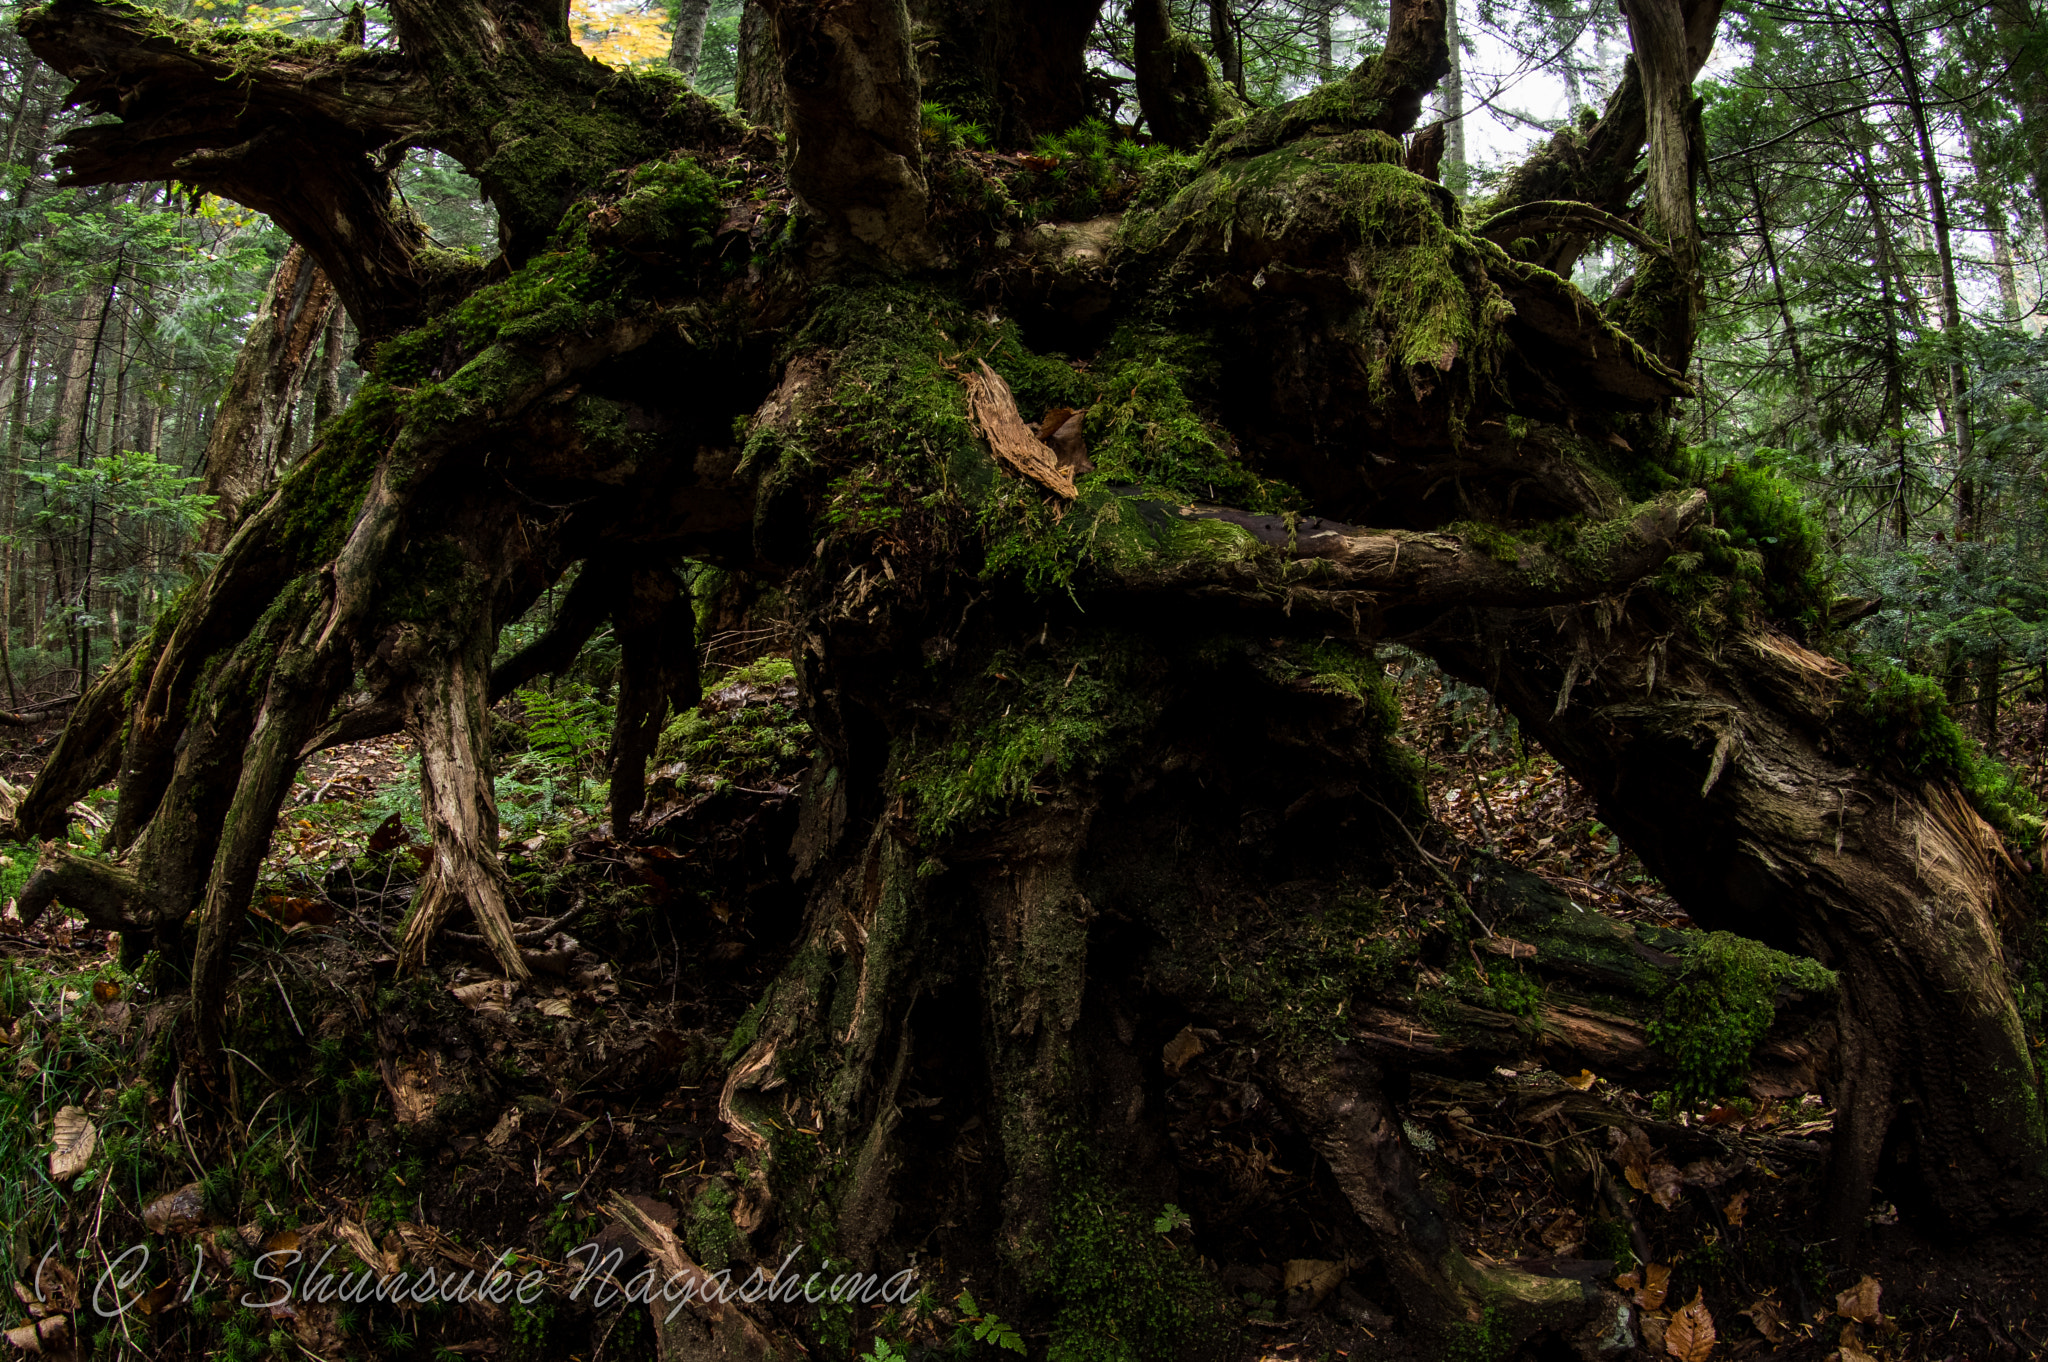 Pentax K-3 sample photo. The roots of the fragrant wood photography